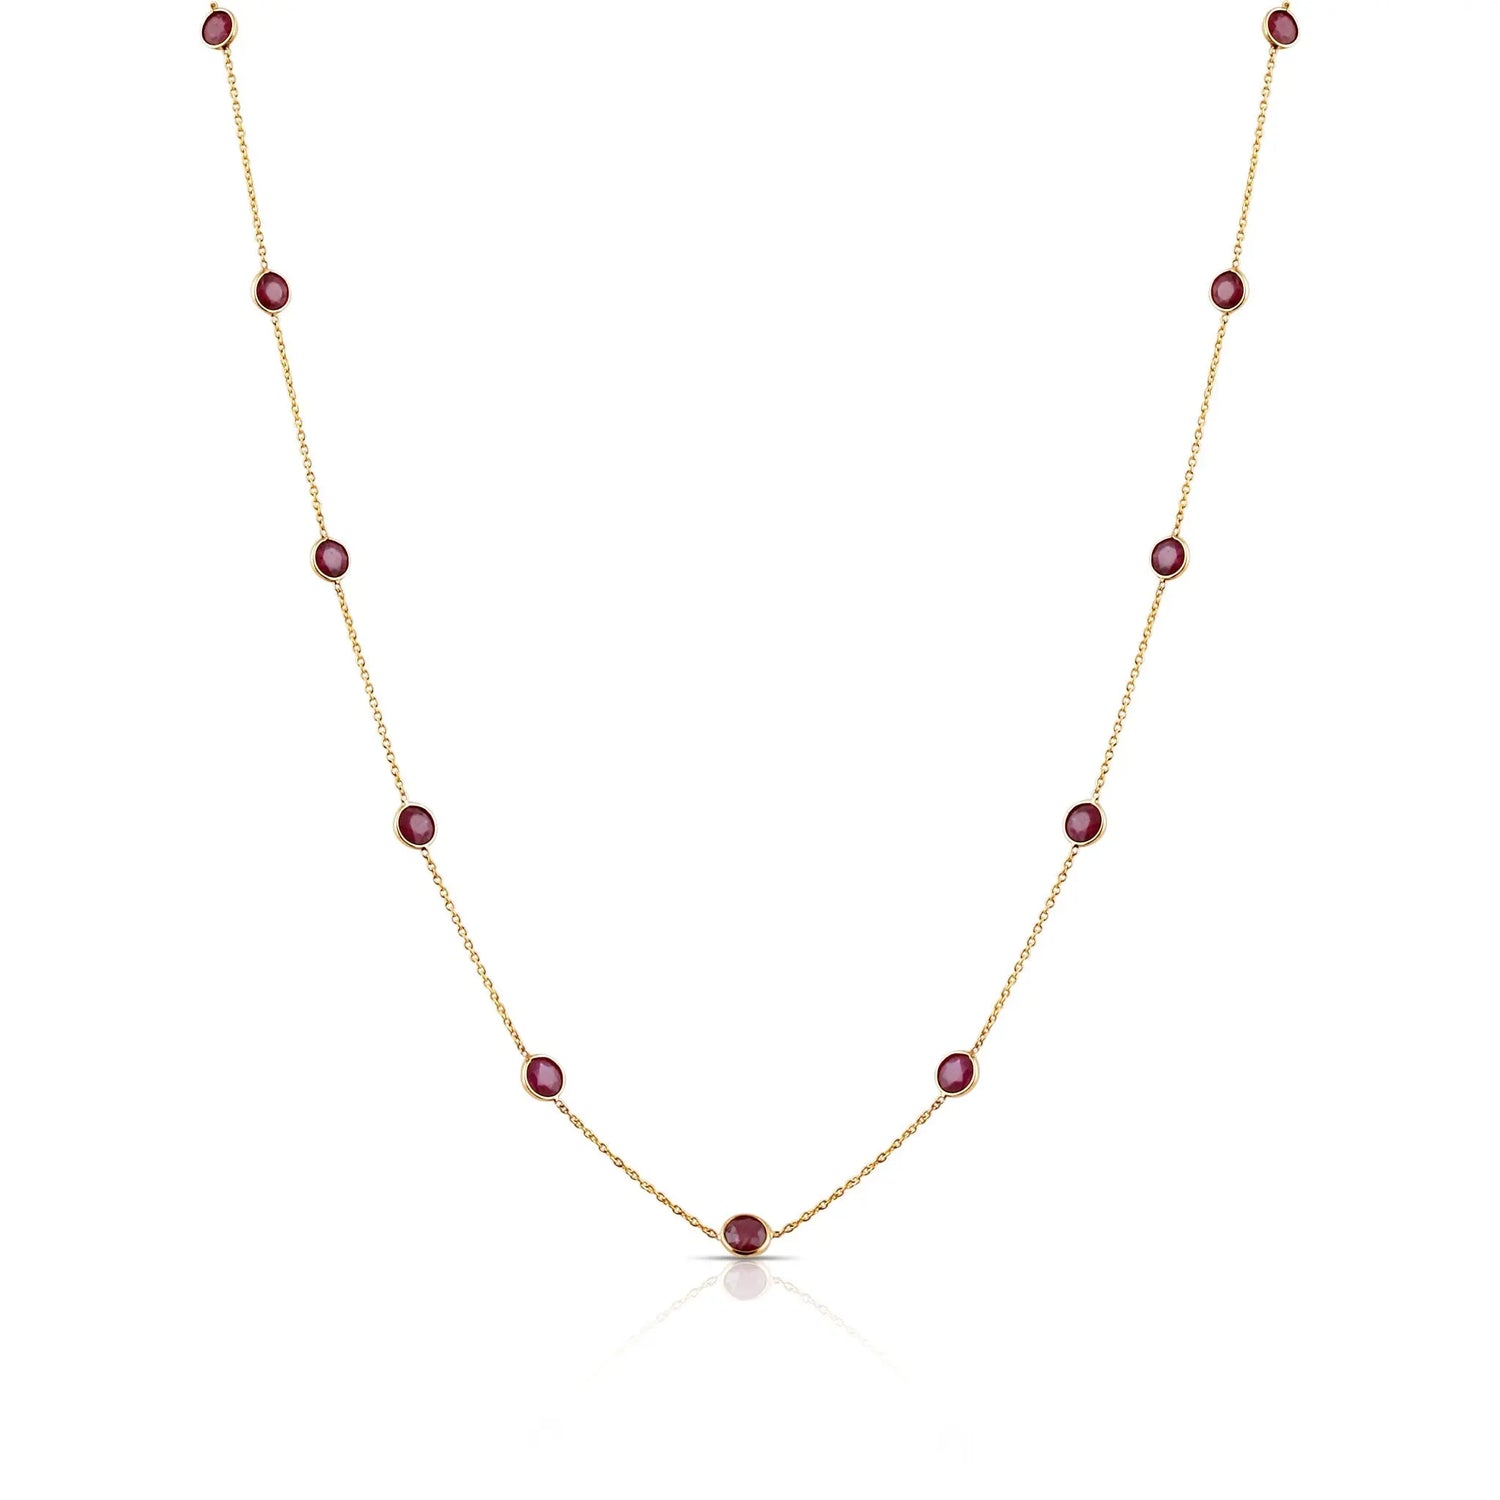 Round Ruby Necklace - Squash Blossom Vail